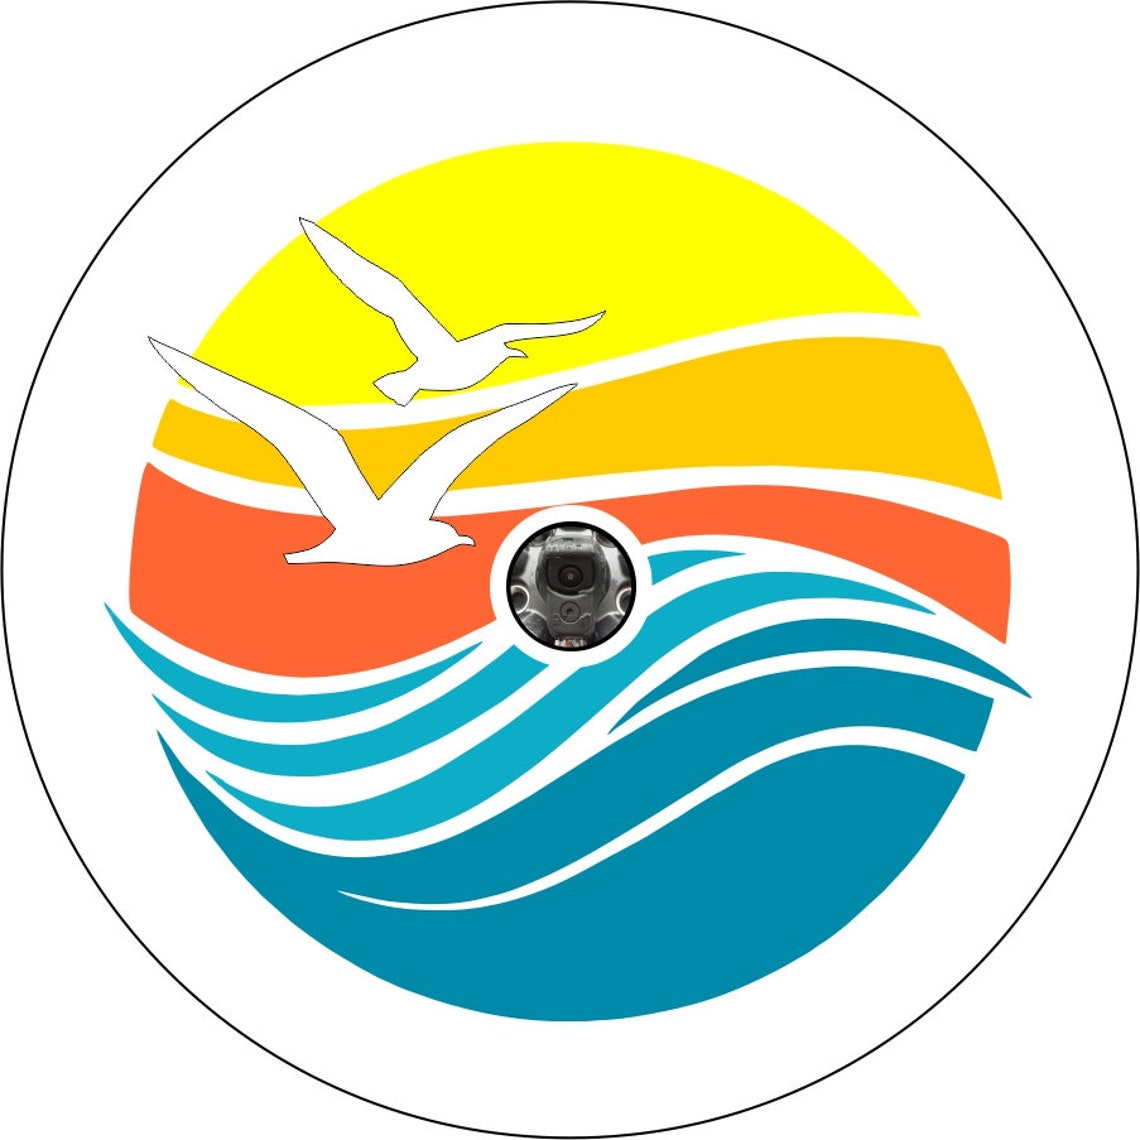 Vinyl spare tire cover design that is beautiful and simple geometric designed ocean, sunset and seagulls flying. This design version can be printed on a white vinyl tire cover with a back up camera hole.